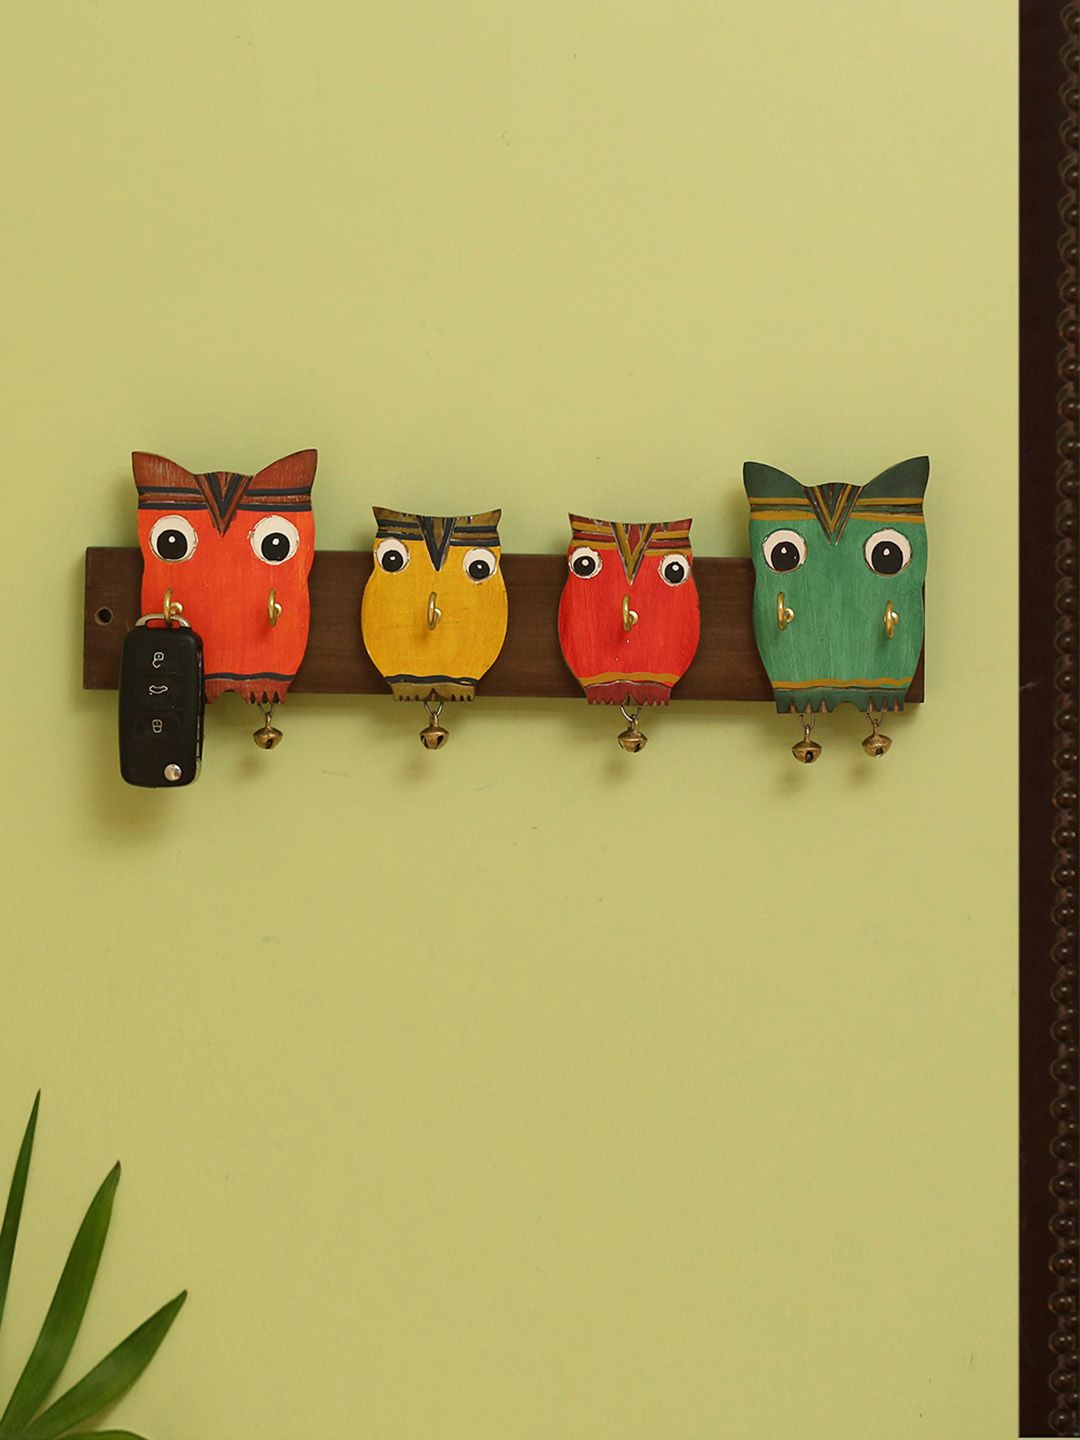 ExclusiveLane Brown & Red Handcrafted Owl Family Decorative Key Holder In Mango Wooden Price in India